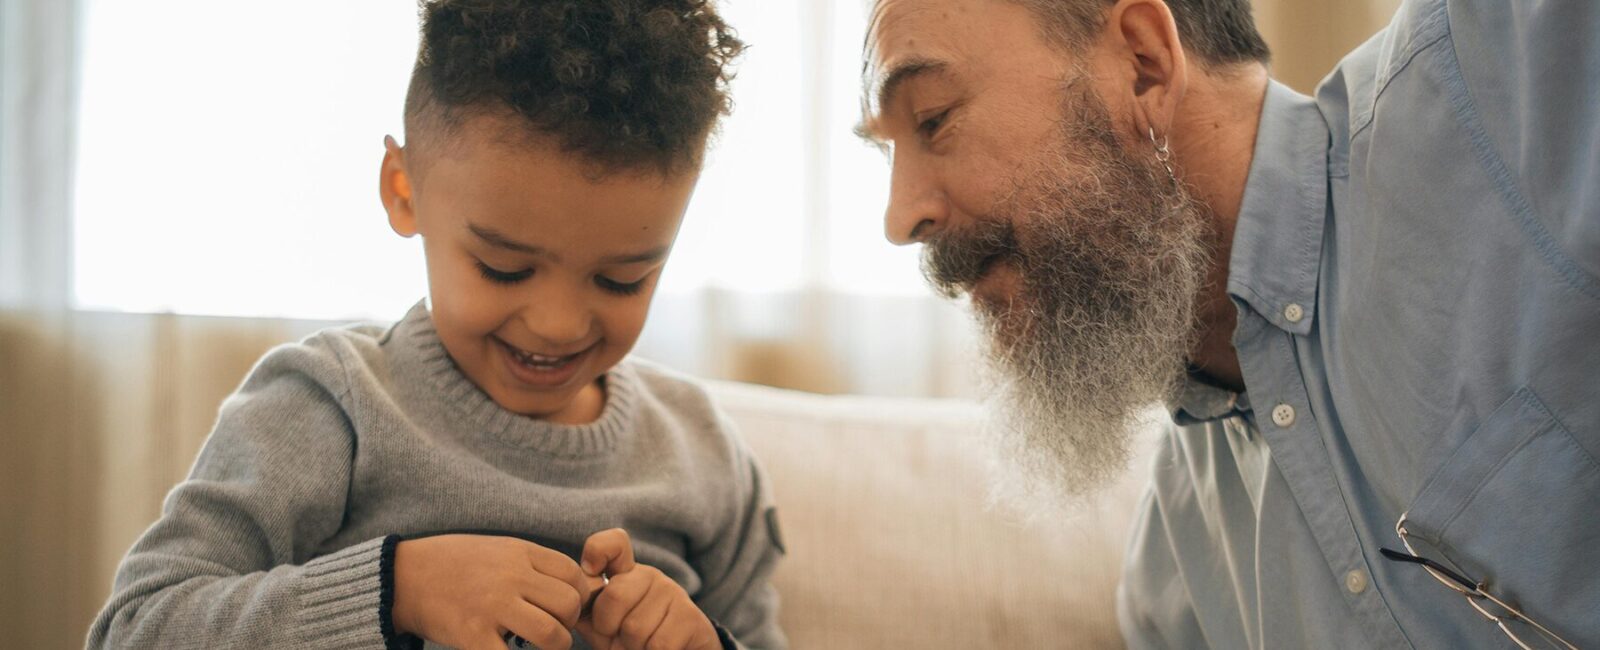 A young child, with curly dark hair, is seated on the couch next to his grandfather, who has a long beard and is wearing a gray sweater. His grandfather watches over him as he plays with his toy cars.